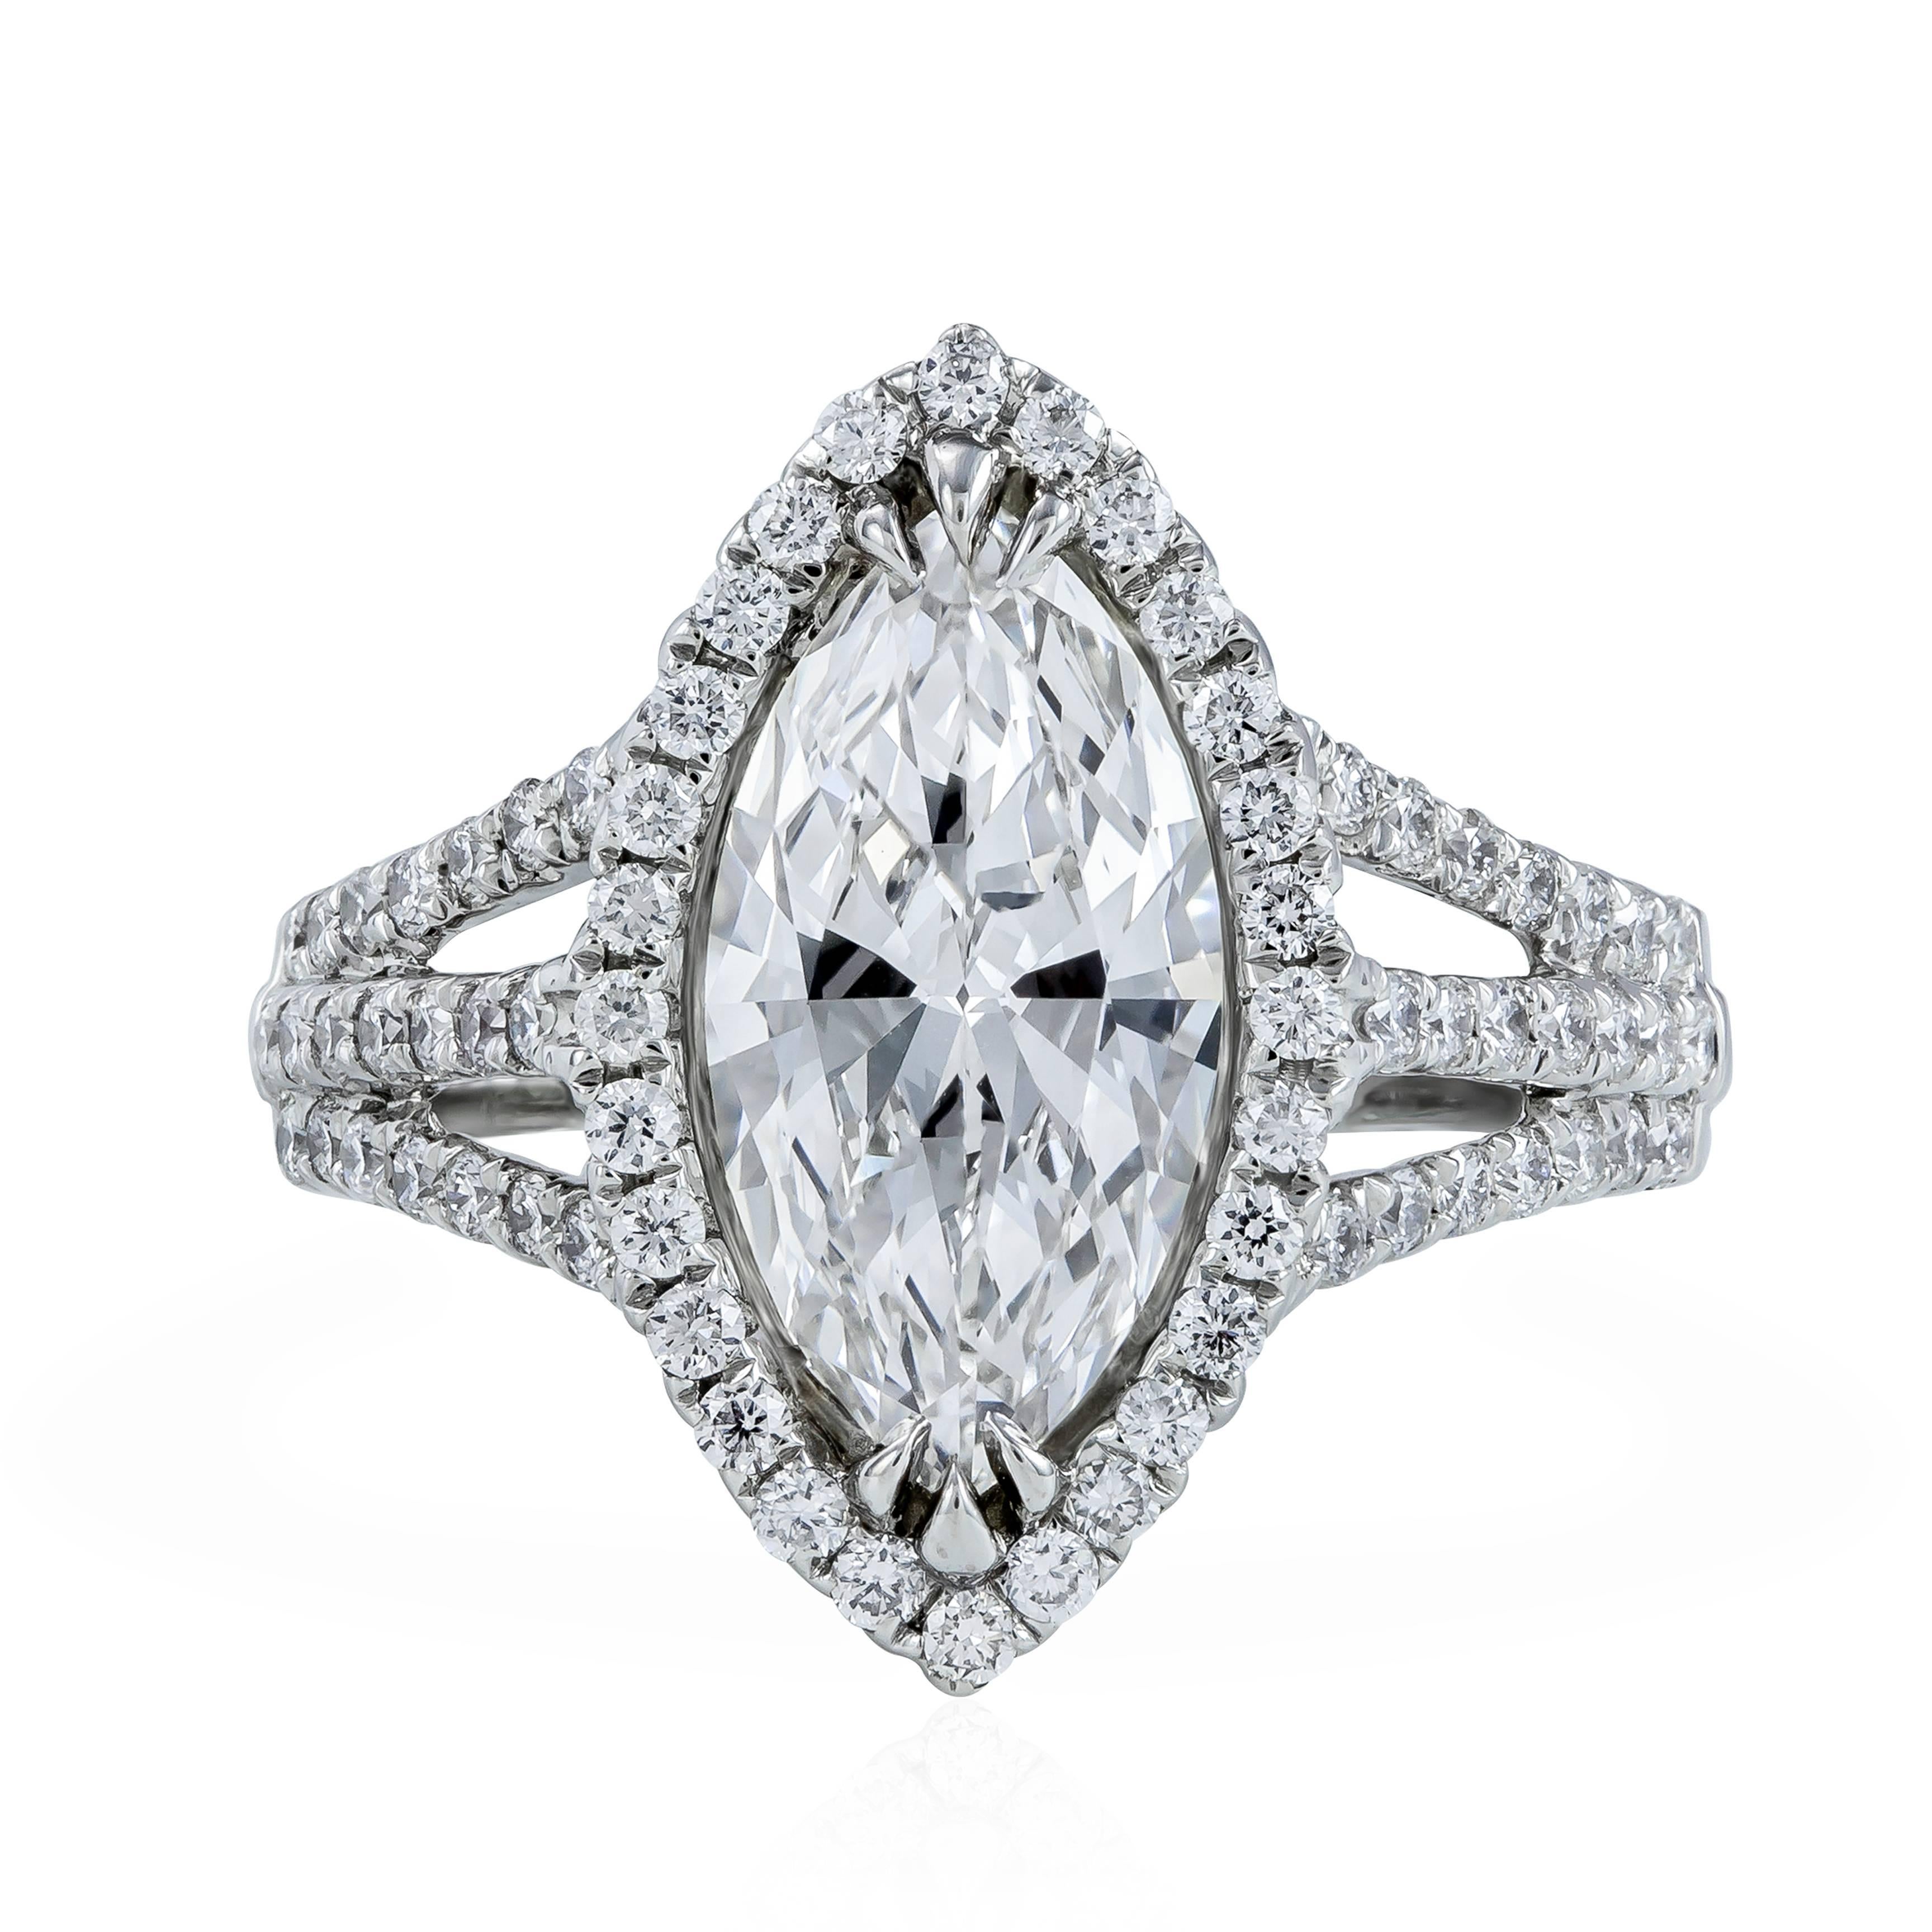 GIA Certified 2.15 Carat Marquise Cut Diamond Halo Engagement Ring